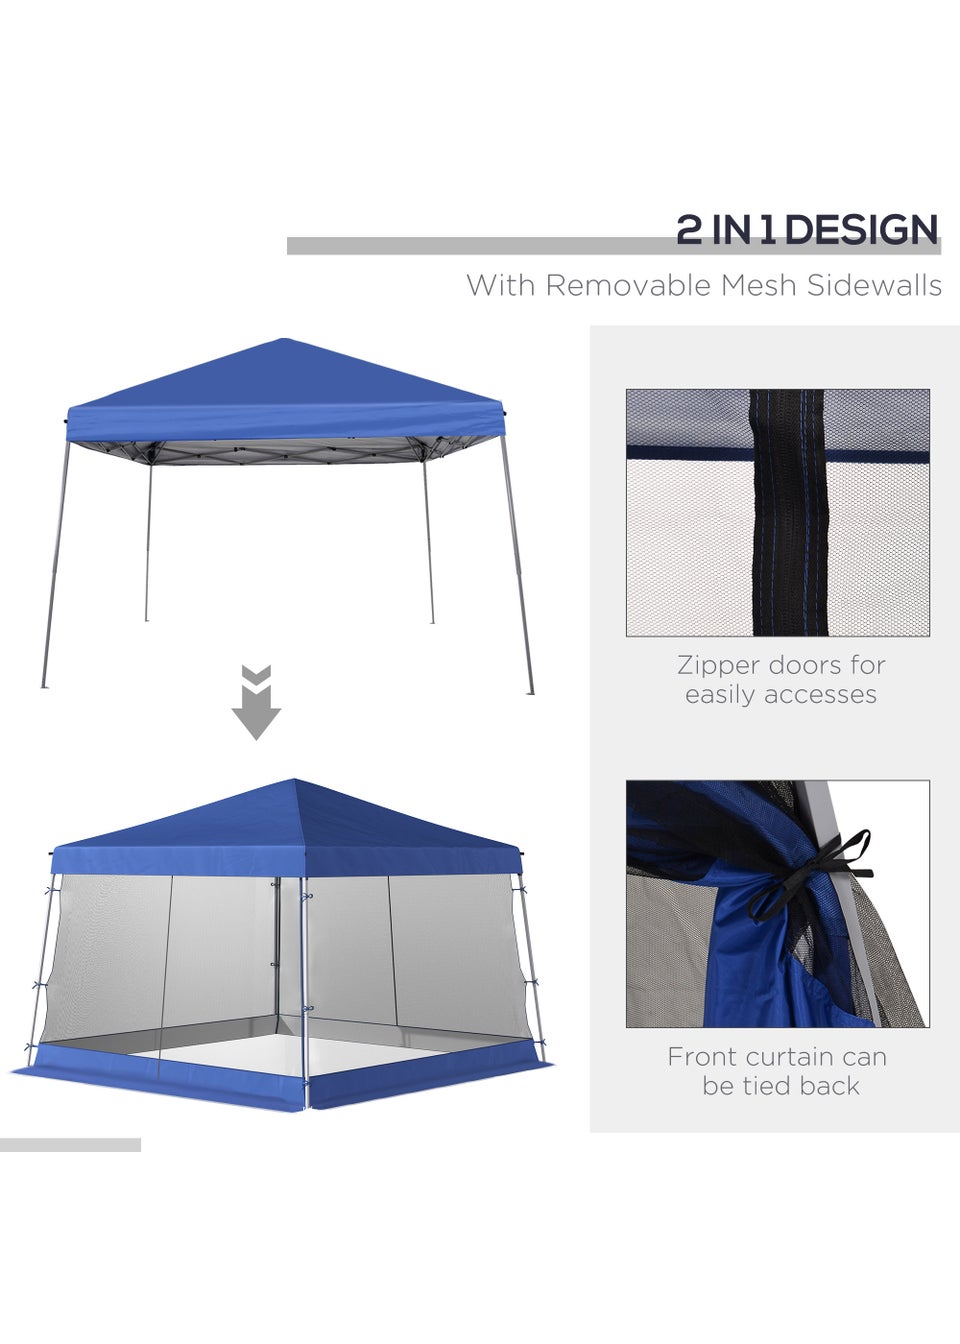 Outsunny Pop Up Gazebo with Mosquito Net (2.6m x 3.6m)